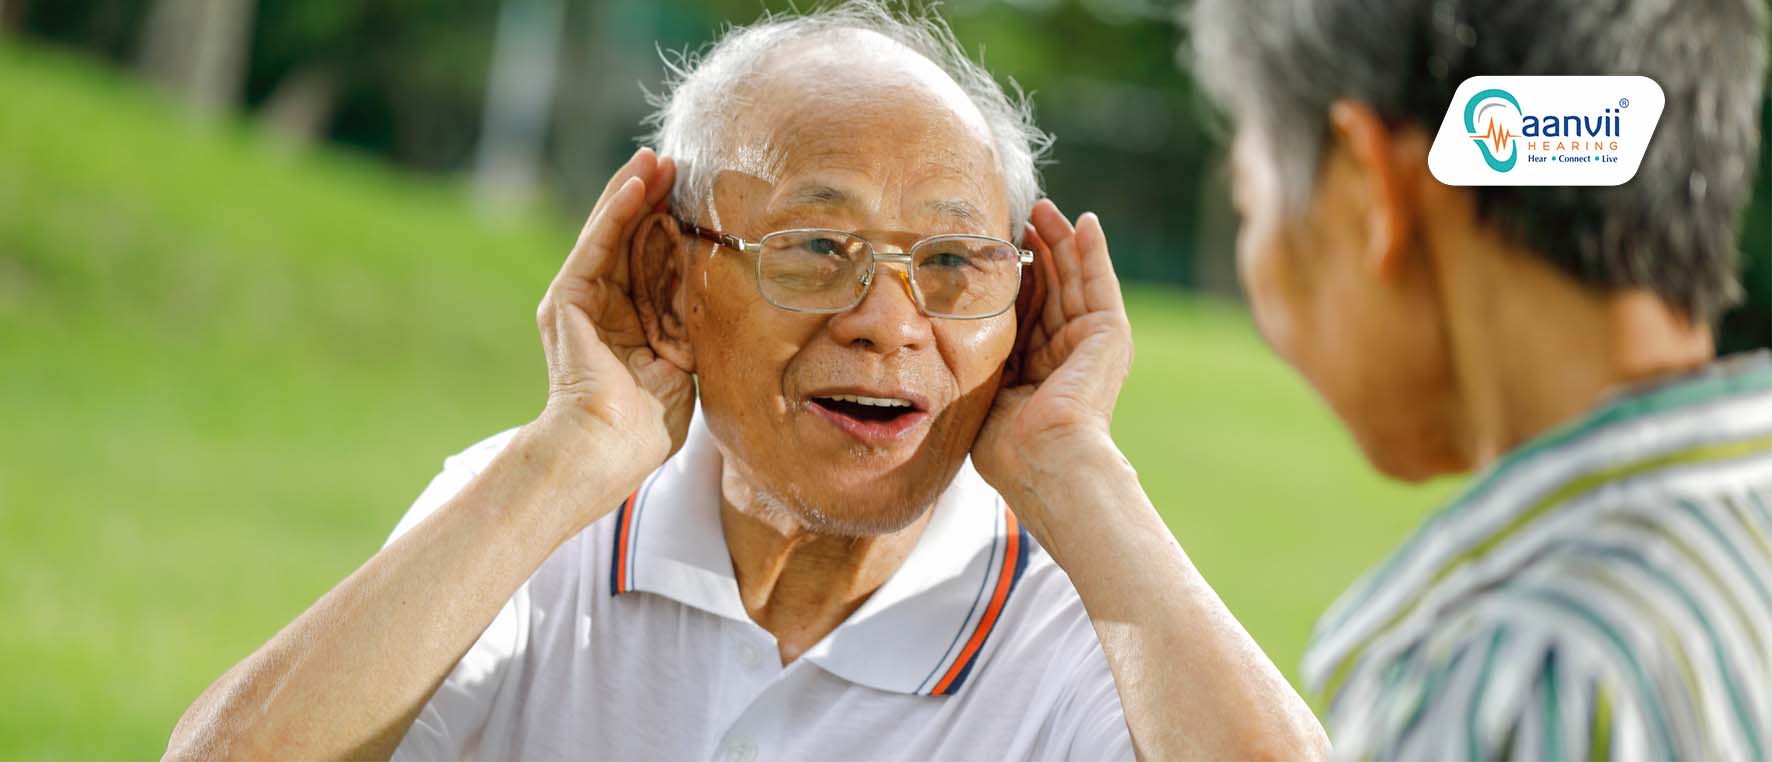 10 Important Steps to Better Hearing | Aanvii Hearing